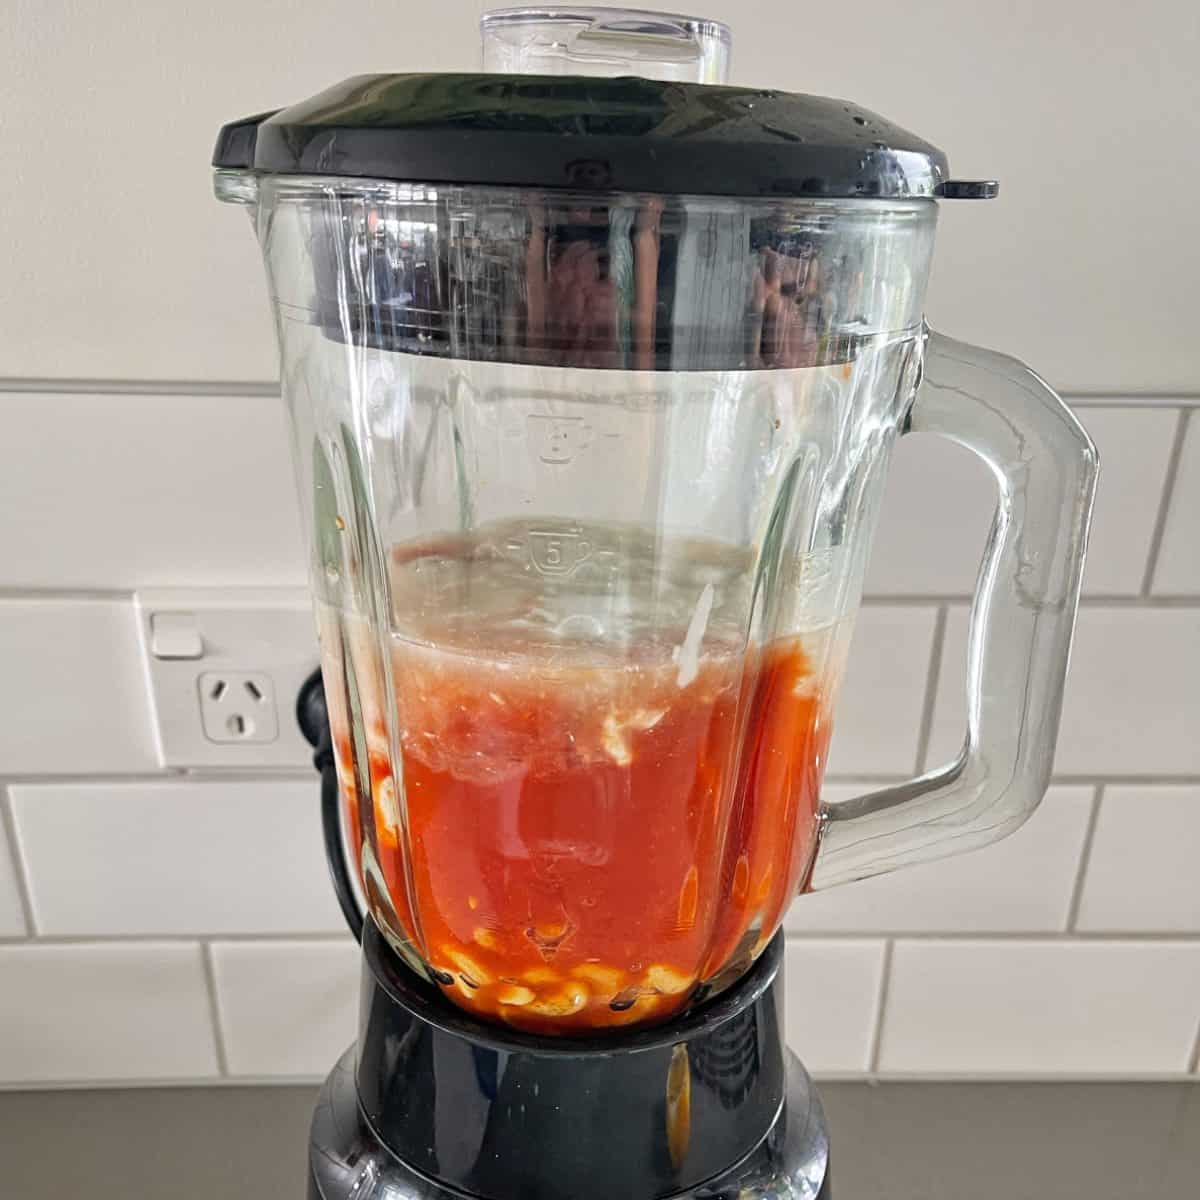 Canned tomatoes and coconut milk in a blender.